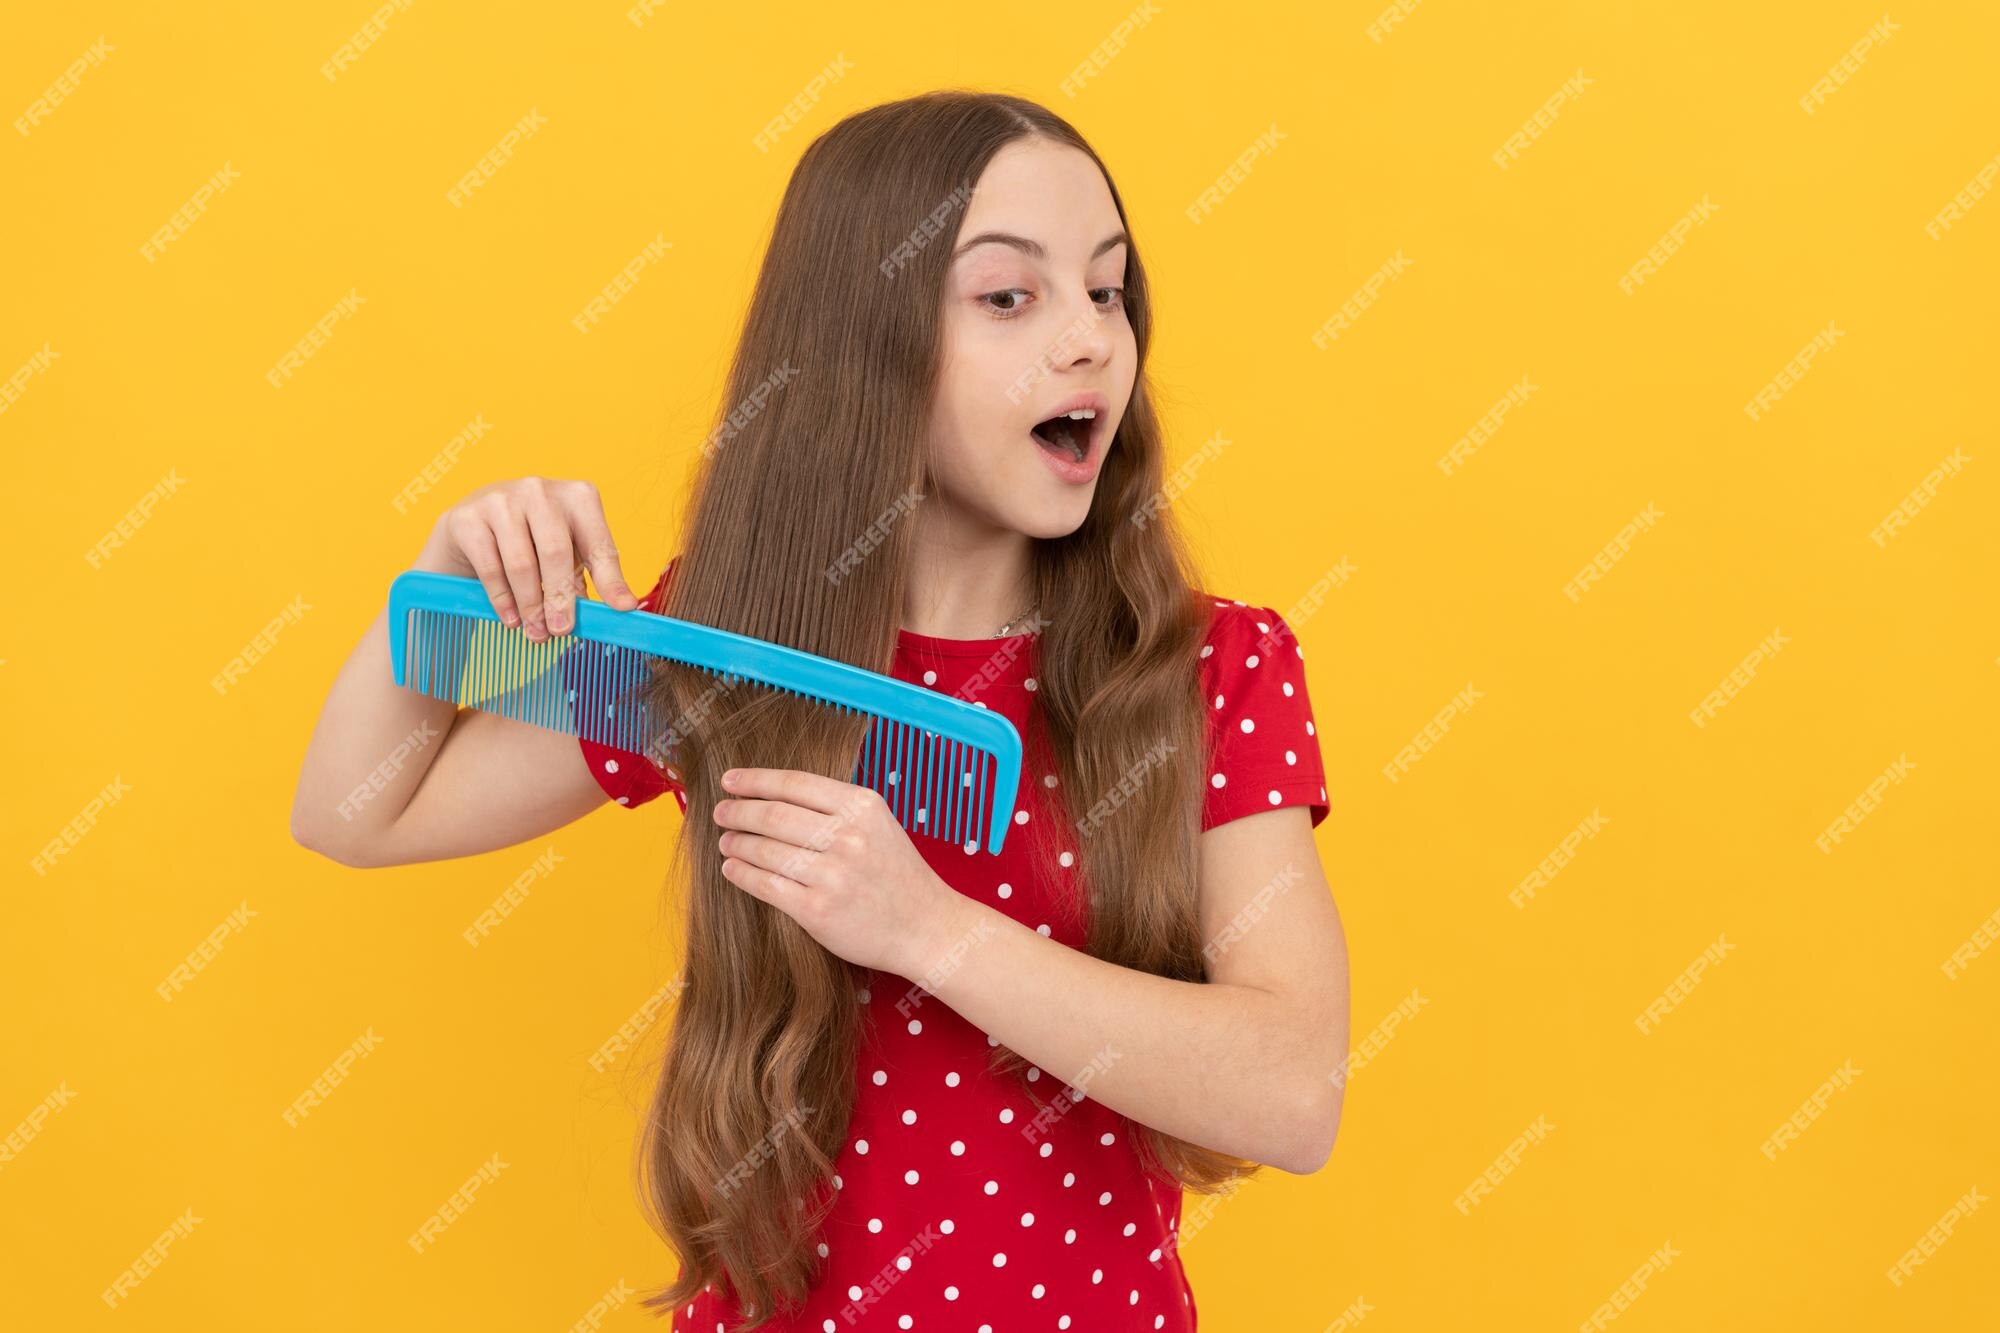 Premium Photo | Haircare and hair loss female fashion model surprised kid  combing long hair hairdresser